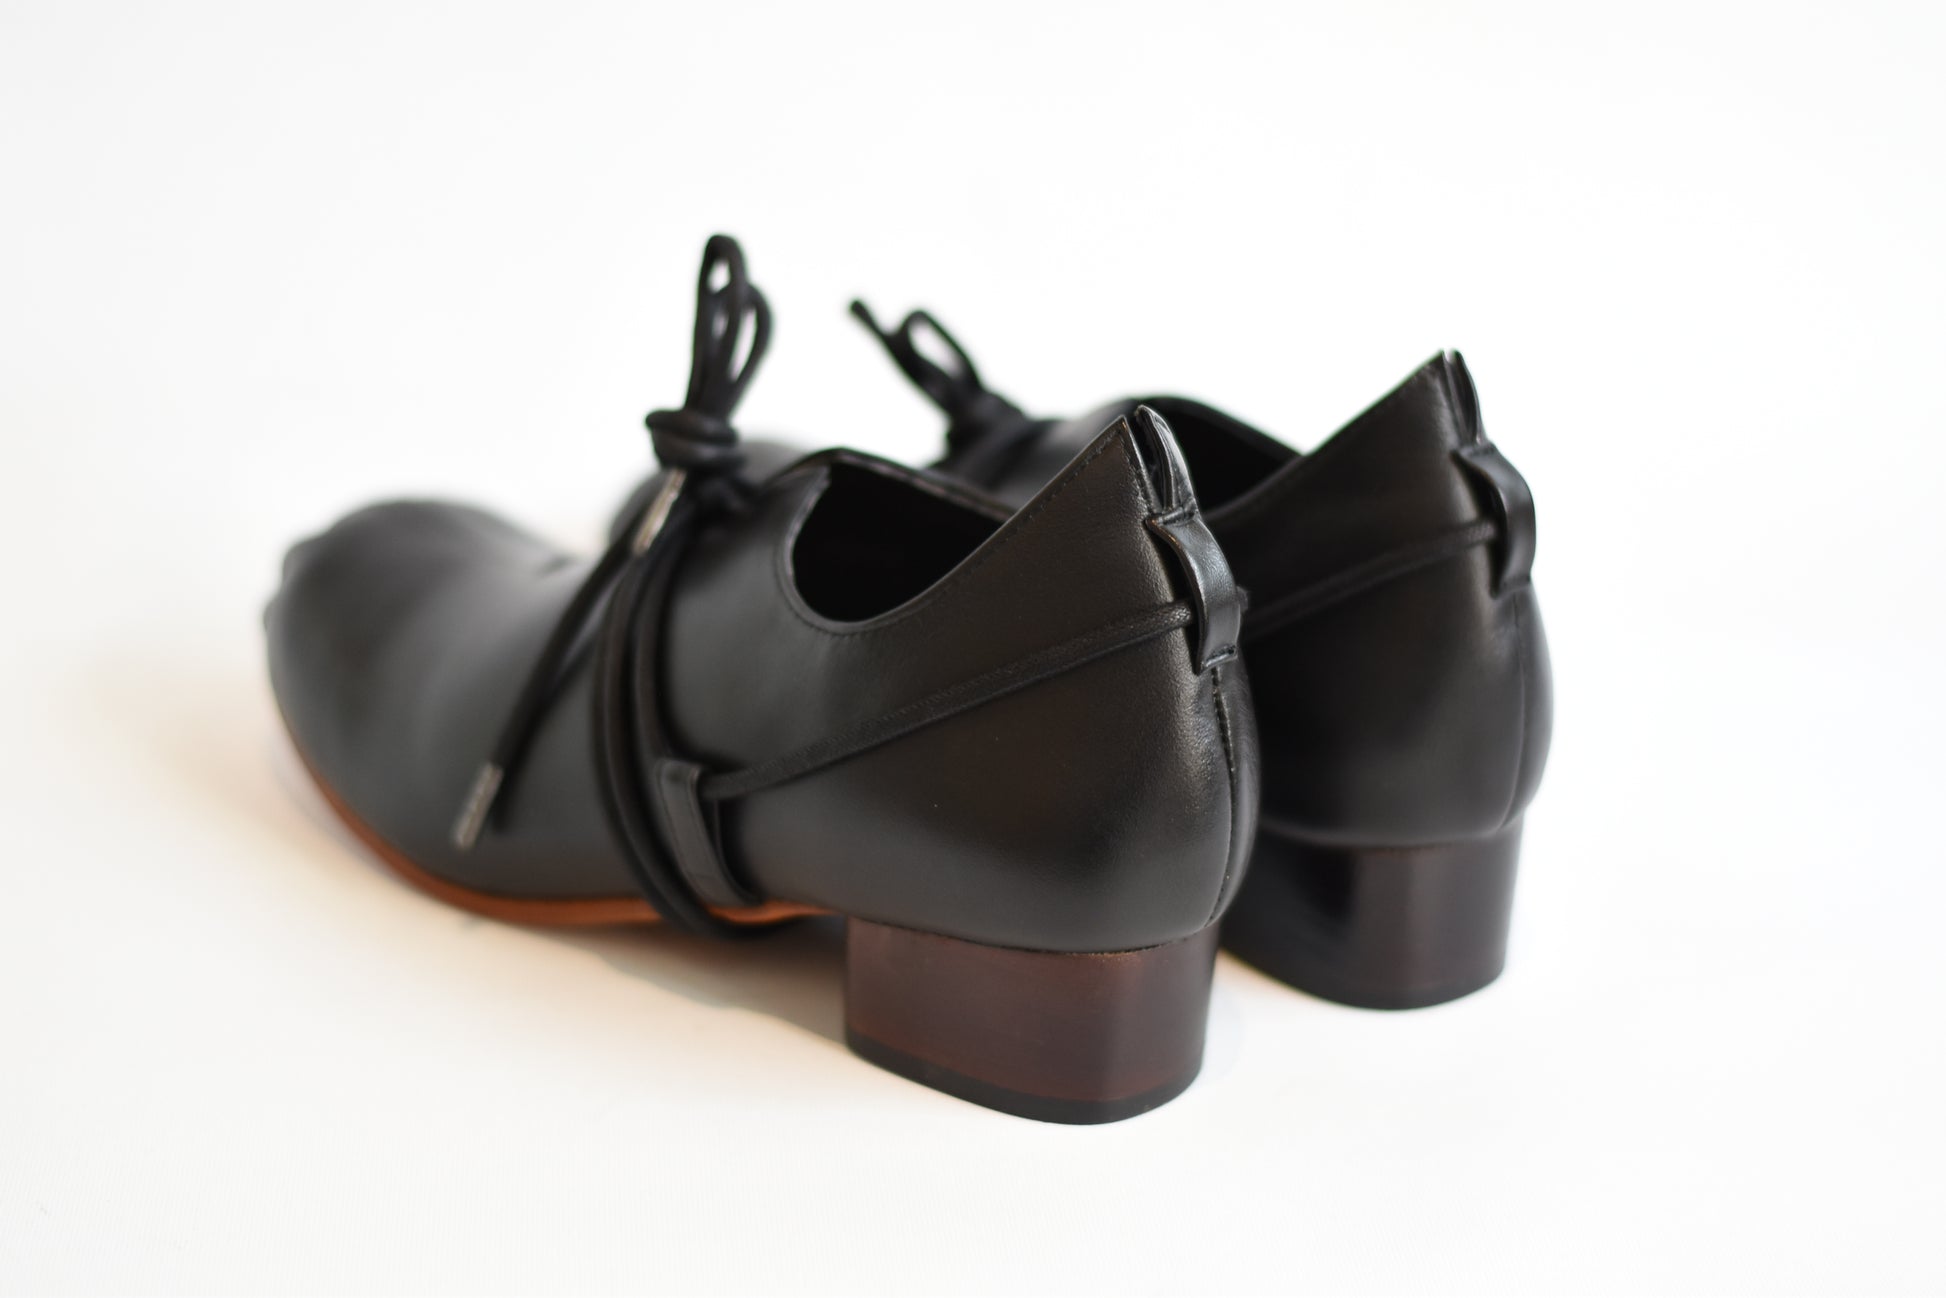 The Foundry Shoe - Black, paired with the Foundry’s unique pleated toe